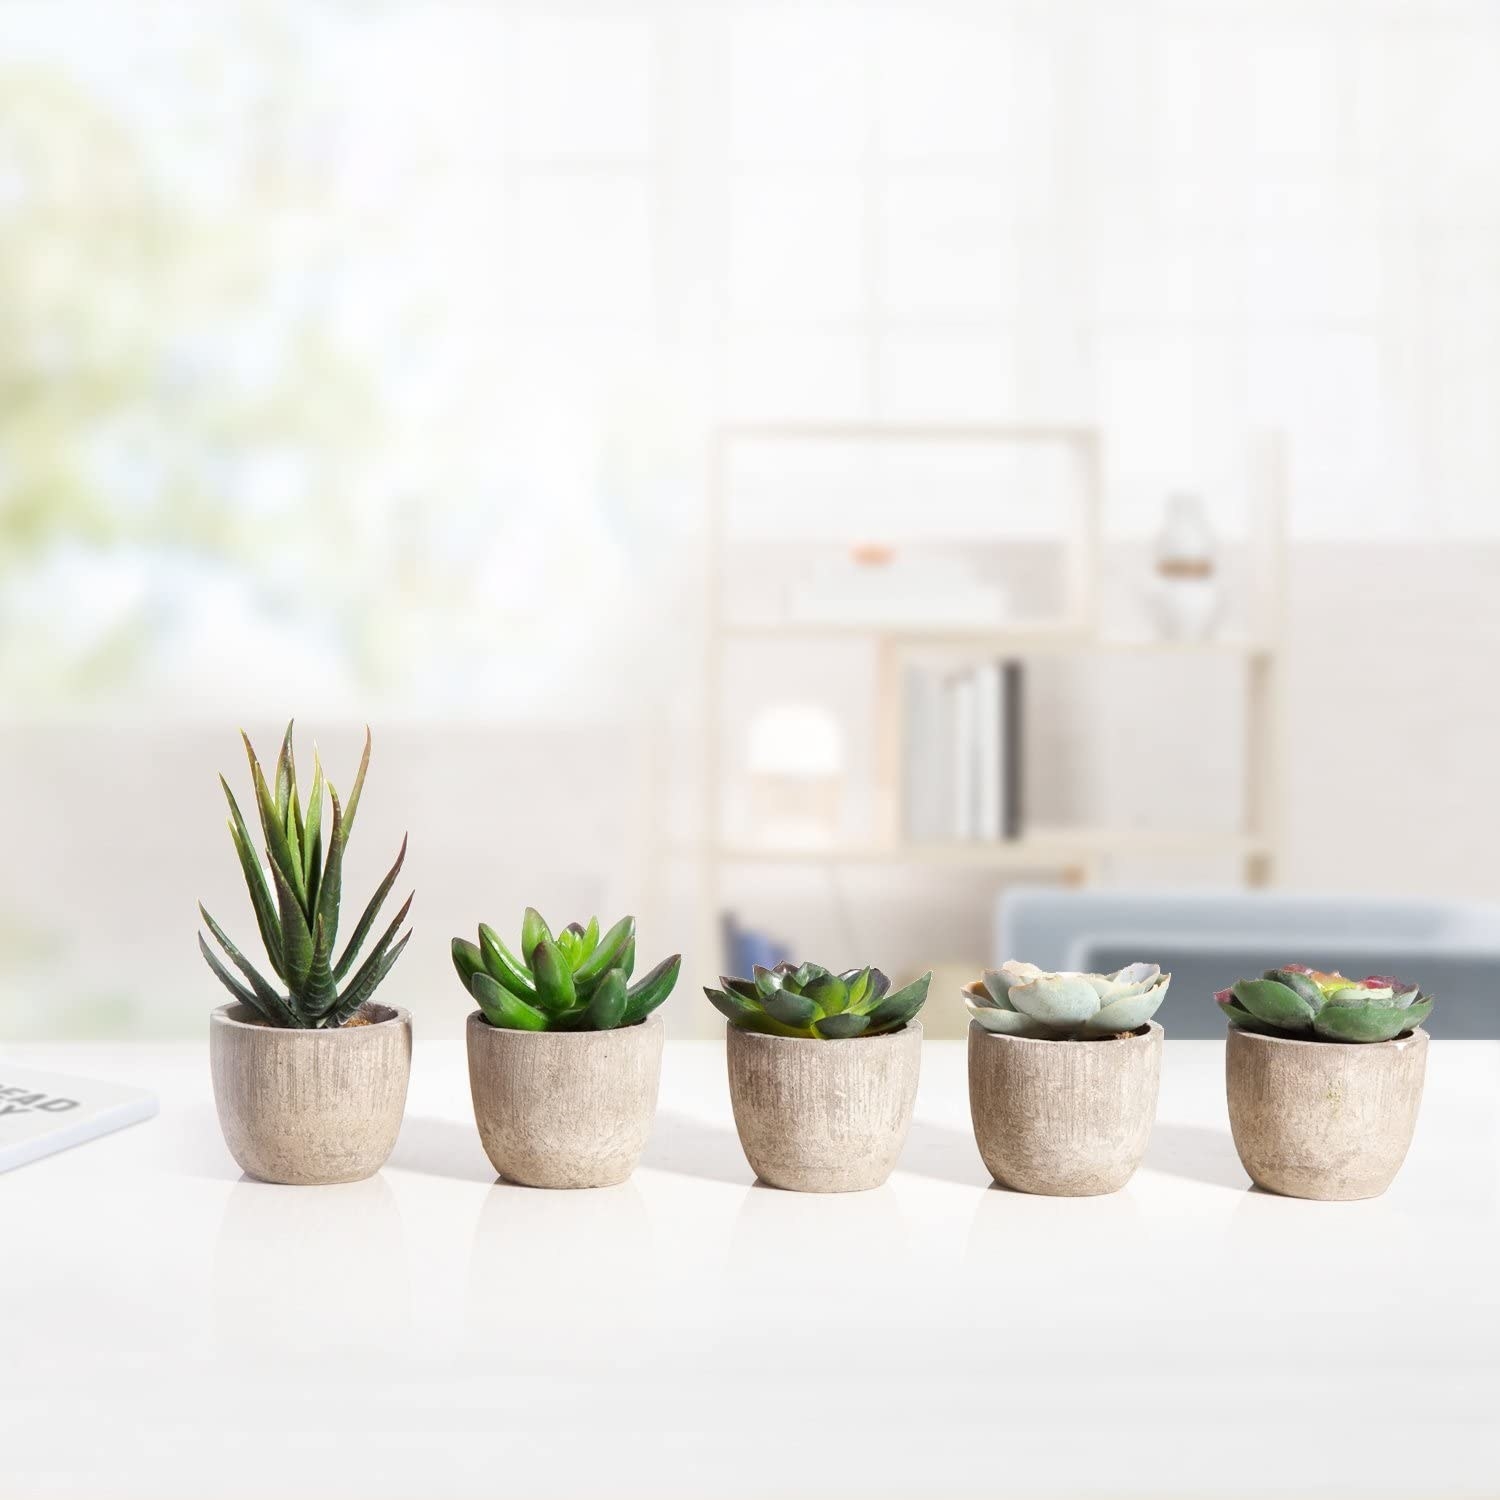 The set of five succulents lined up on a table in a trendy living room